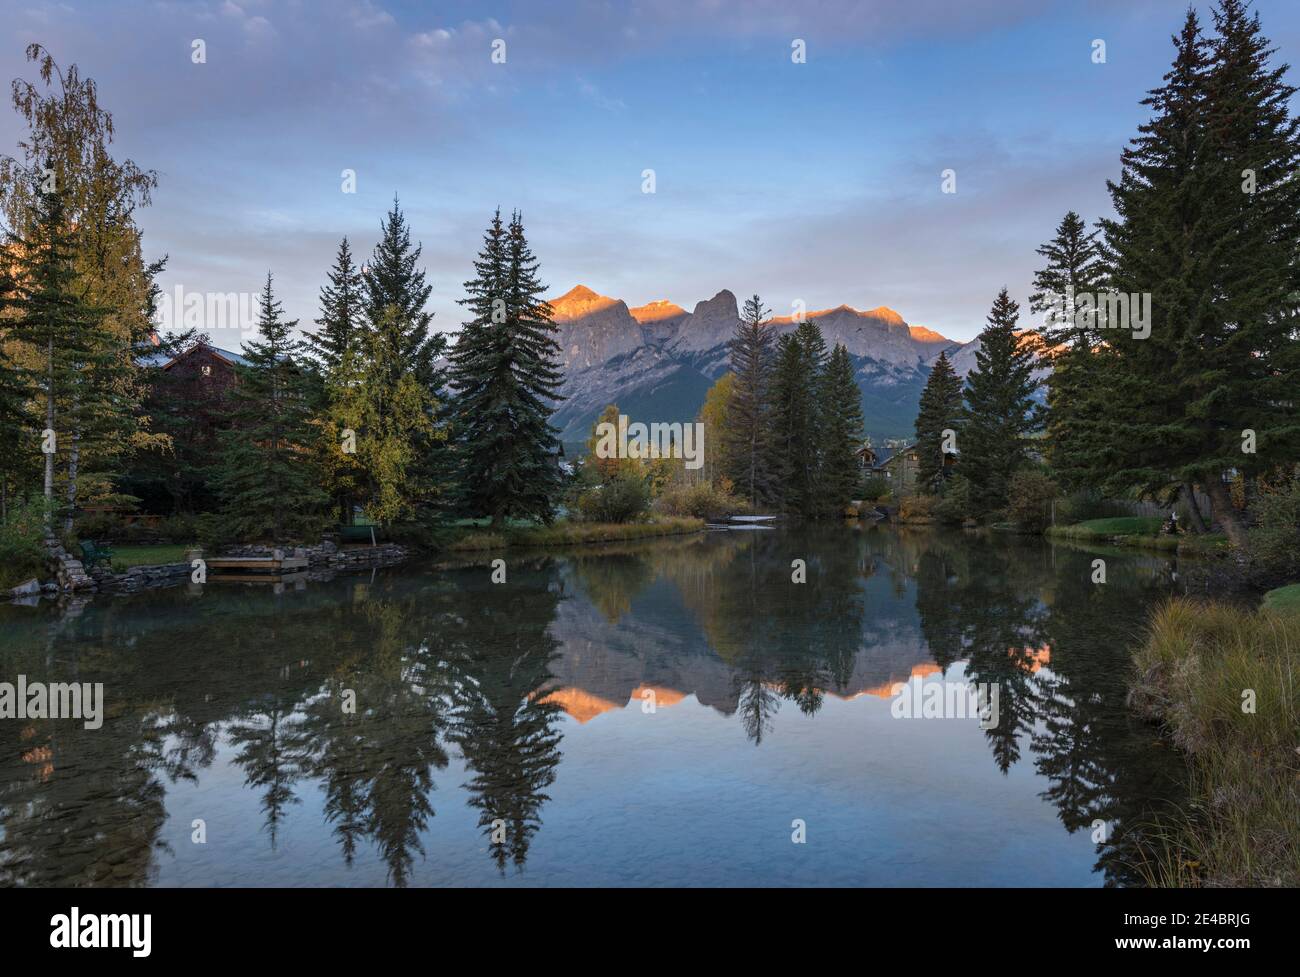 View of the Spring Creek Pond at sunset, Mount Rundle, Canmore, Alberta, Canada Stock Photo